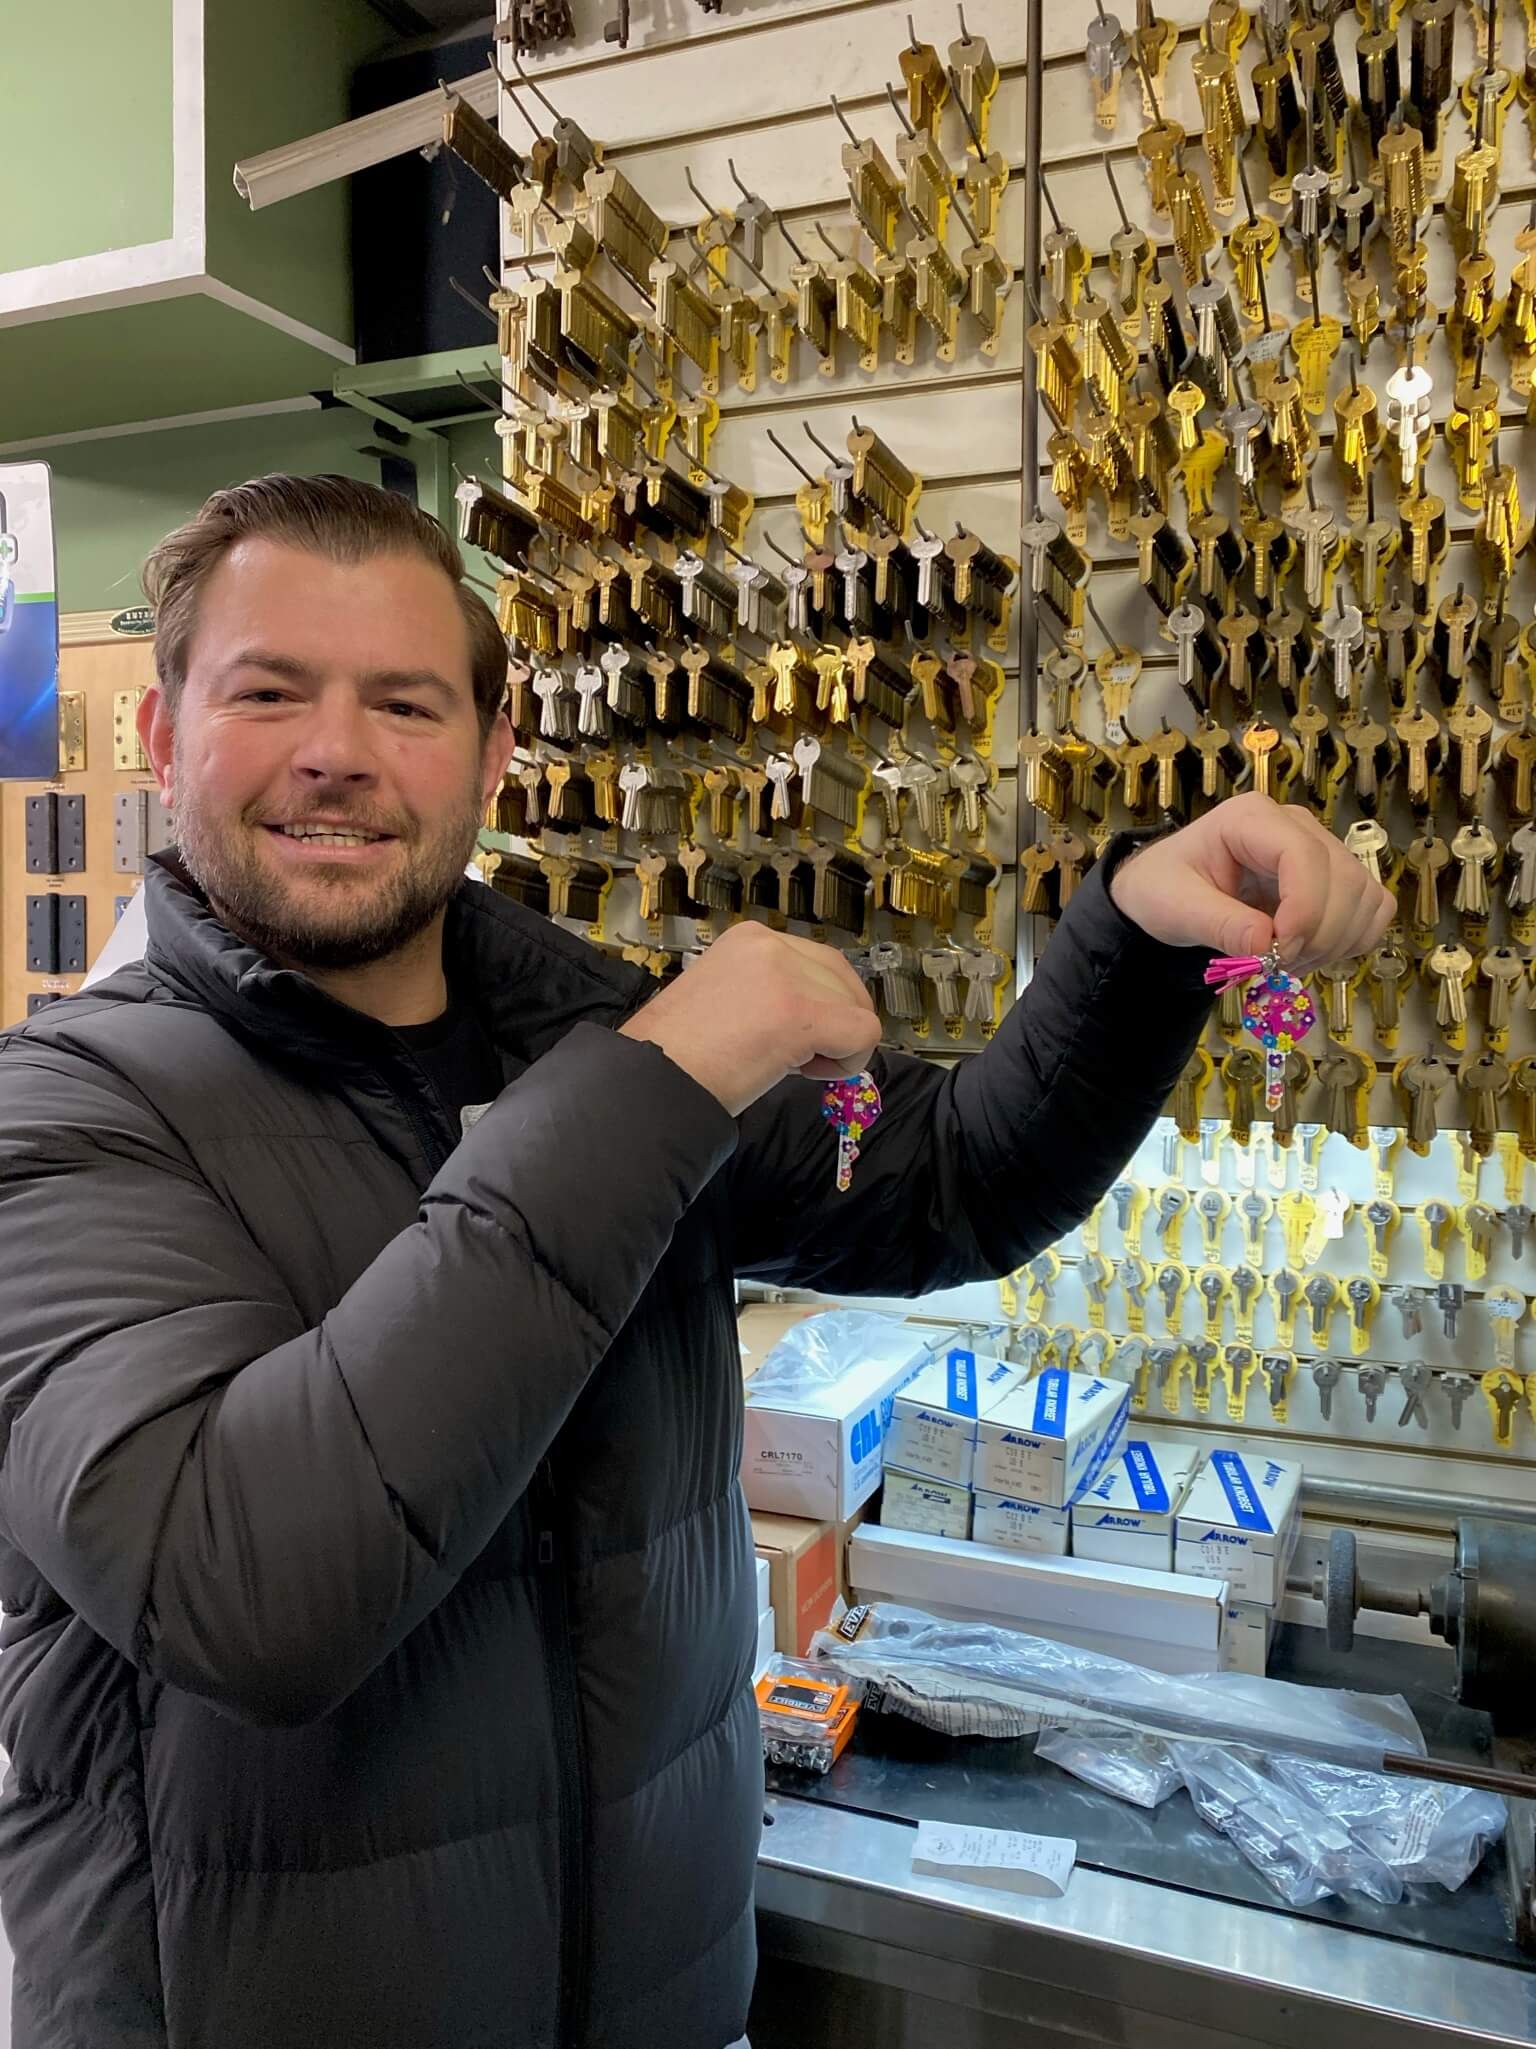 Happy Customer with a brand new set of keys at Speedy Lock and Door in the Lower East Side